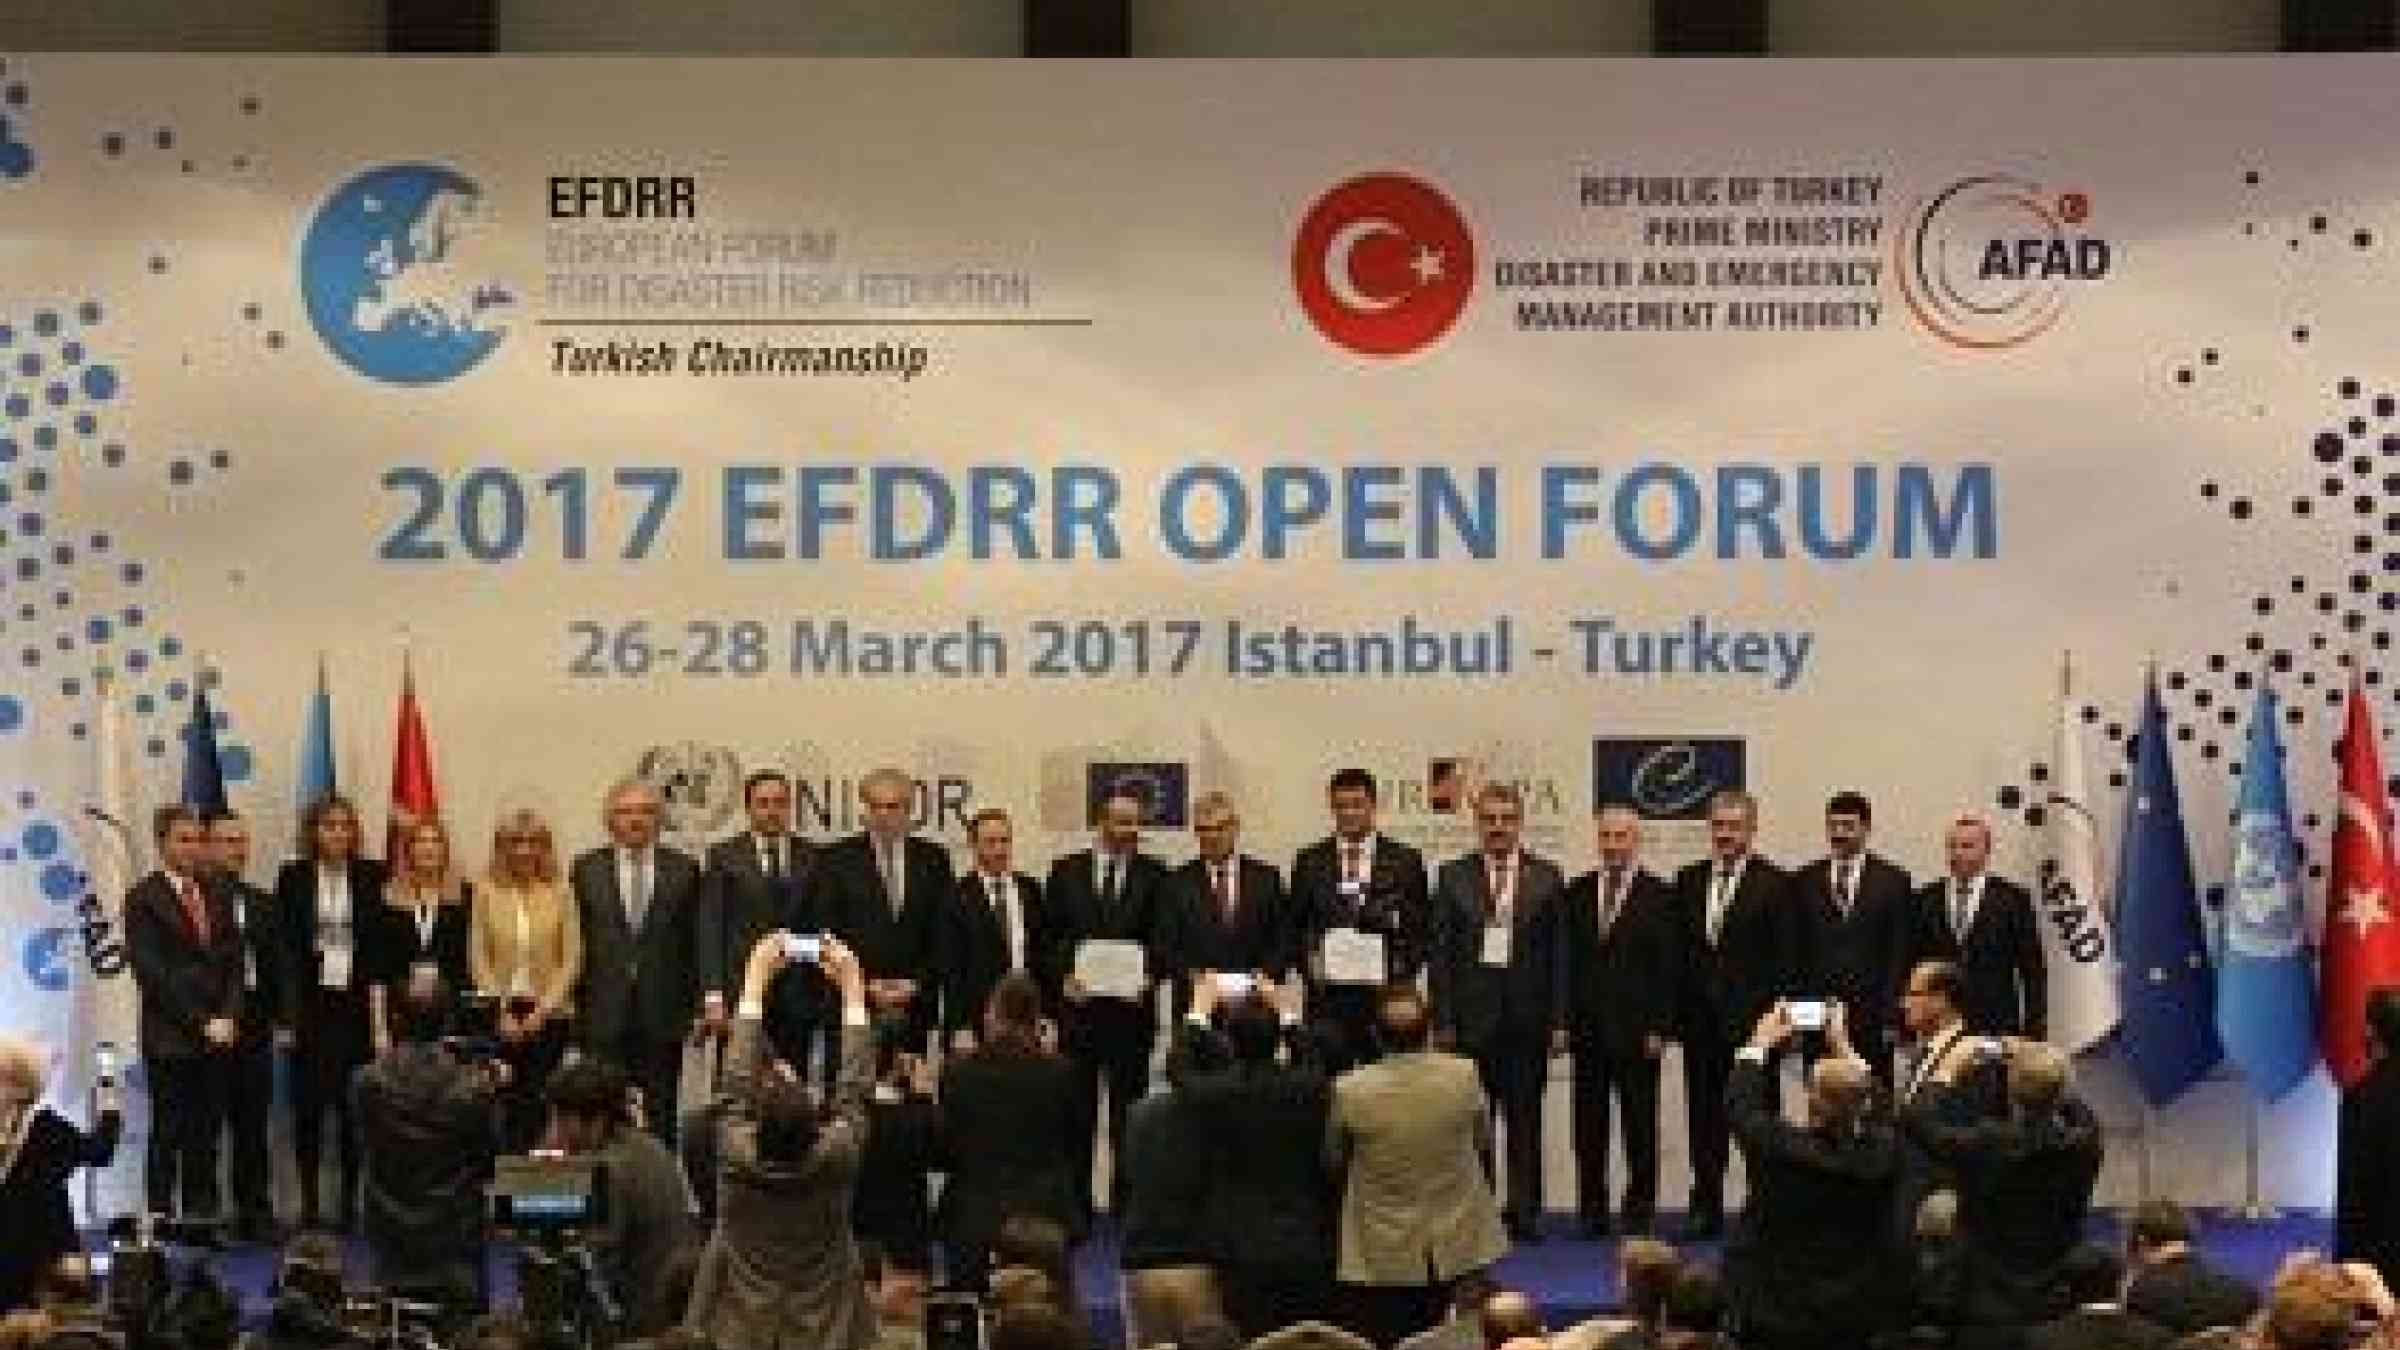 Senior officials take to the stage at the high-level session of the European Forum for Disaster Risk Reduction, which has drawn 500 participants to Istanbul from across the continent (Photo: AFAD)